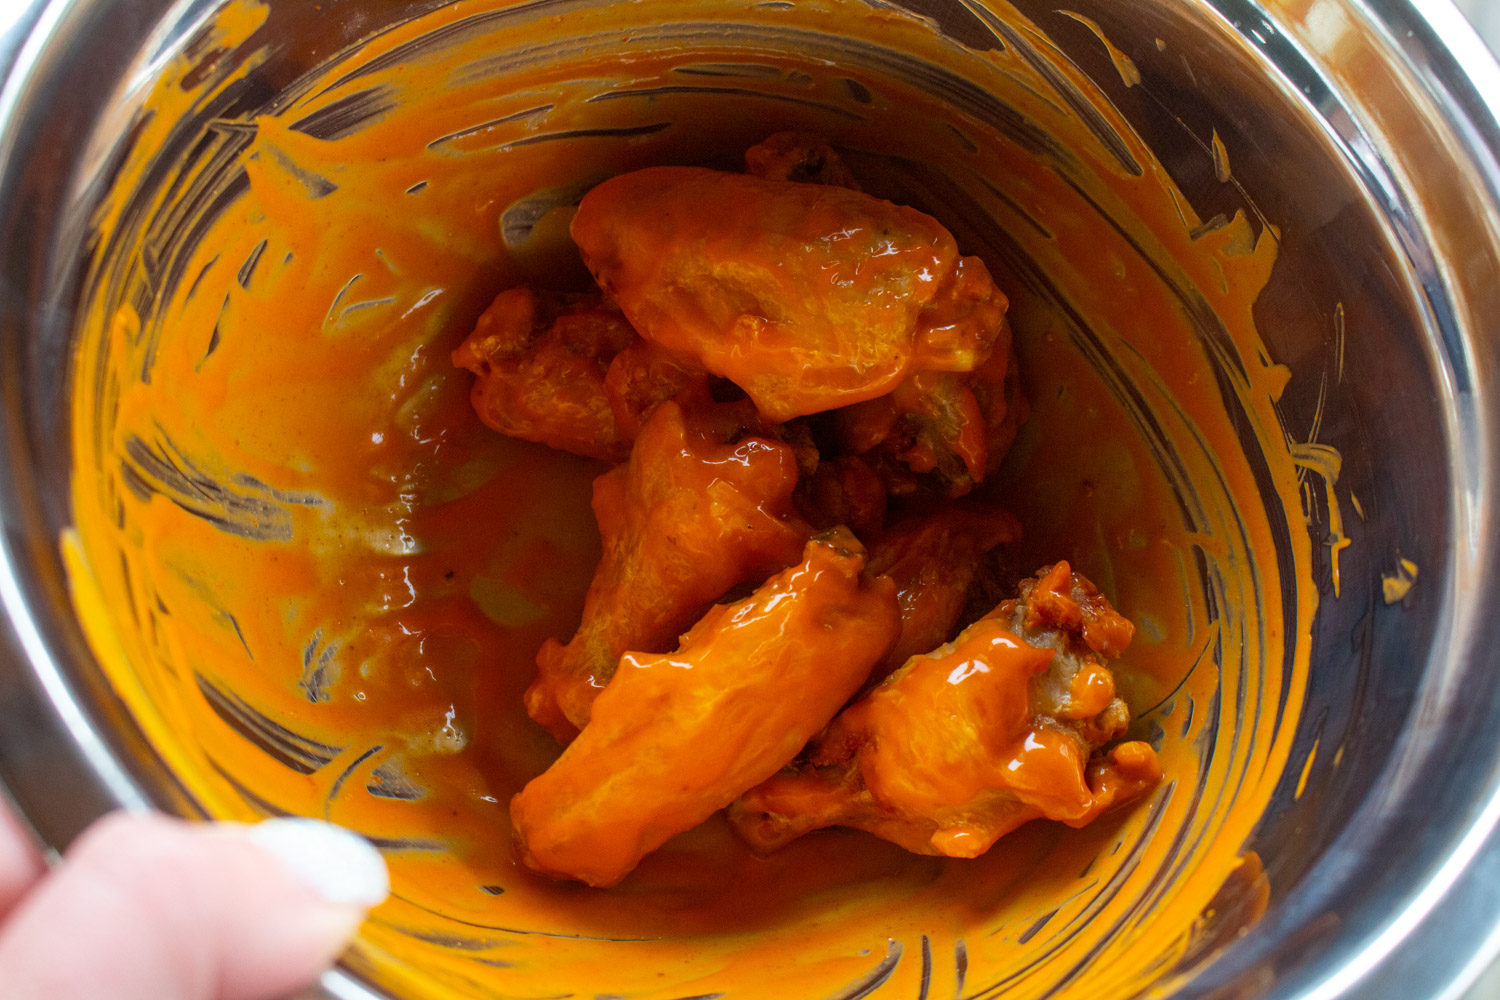 a bowl of buffalo wings in bright red sauce